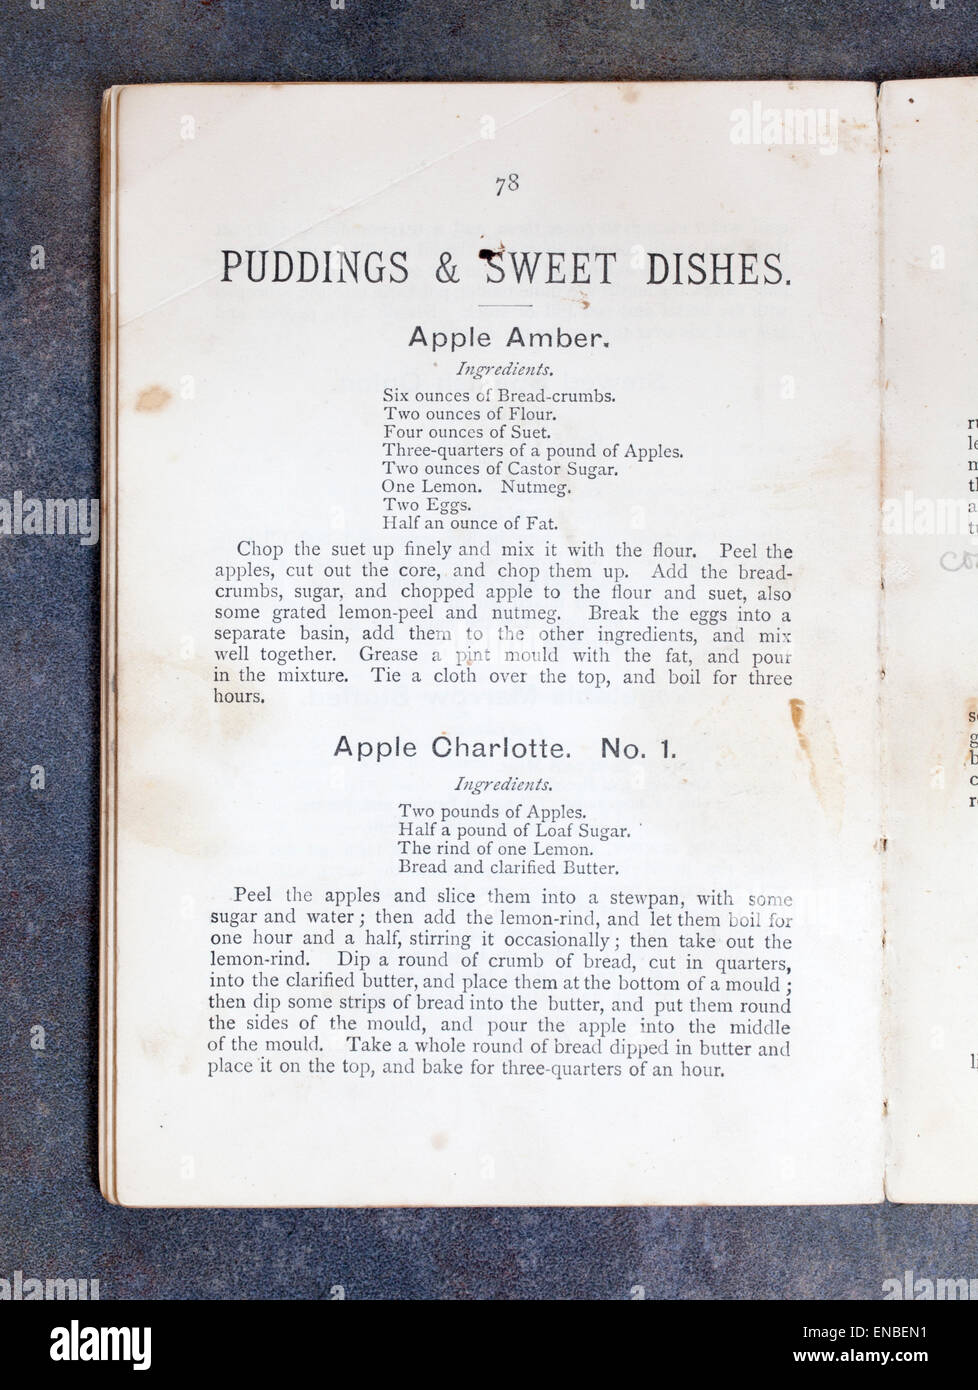 Puddings and Sweet Dishes Chapter from Plain Cookery Recipes Book by Mrs Charles Clarke for the National Training School Stock Photo